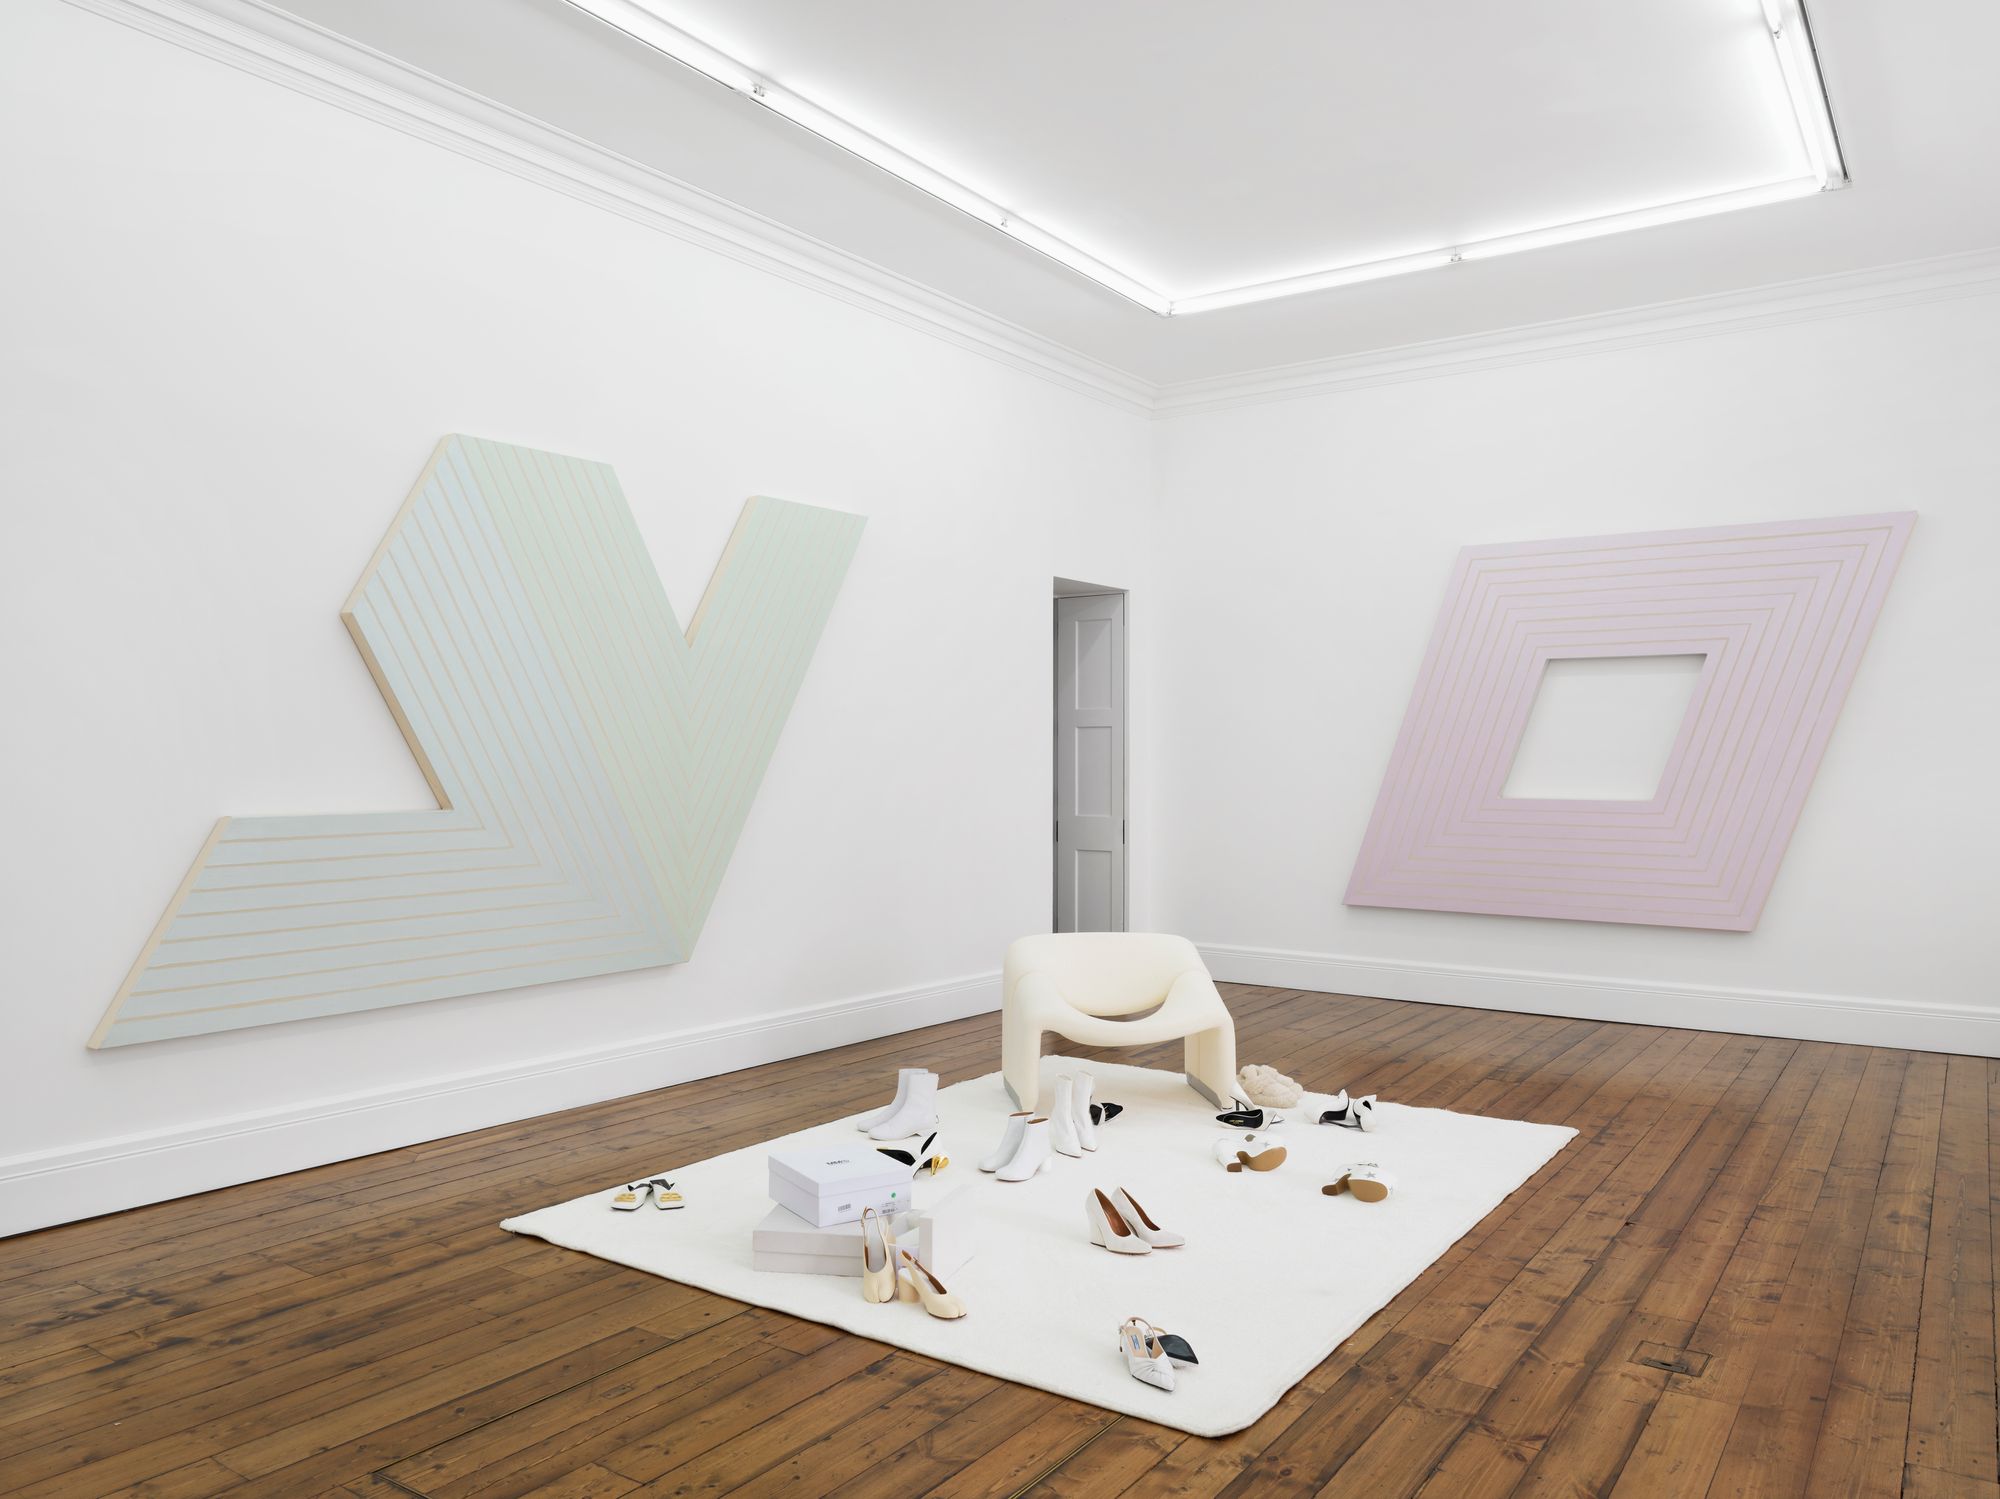 Sylvie Fleury: S.F. at Spruth Magers review